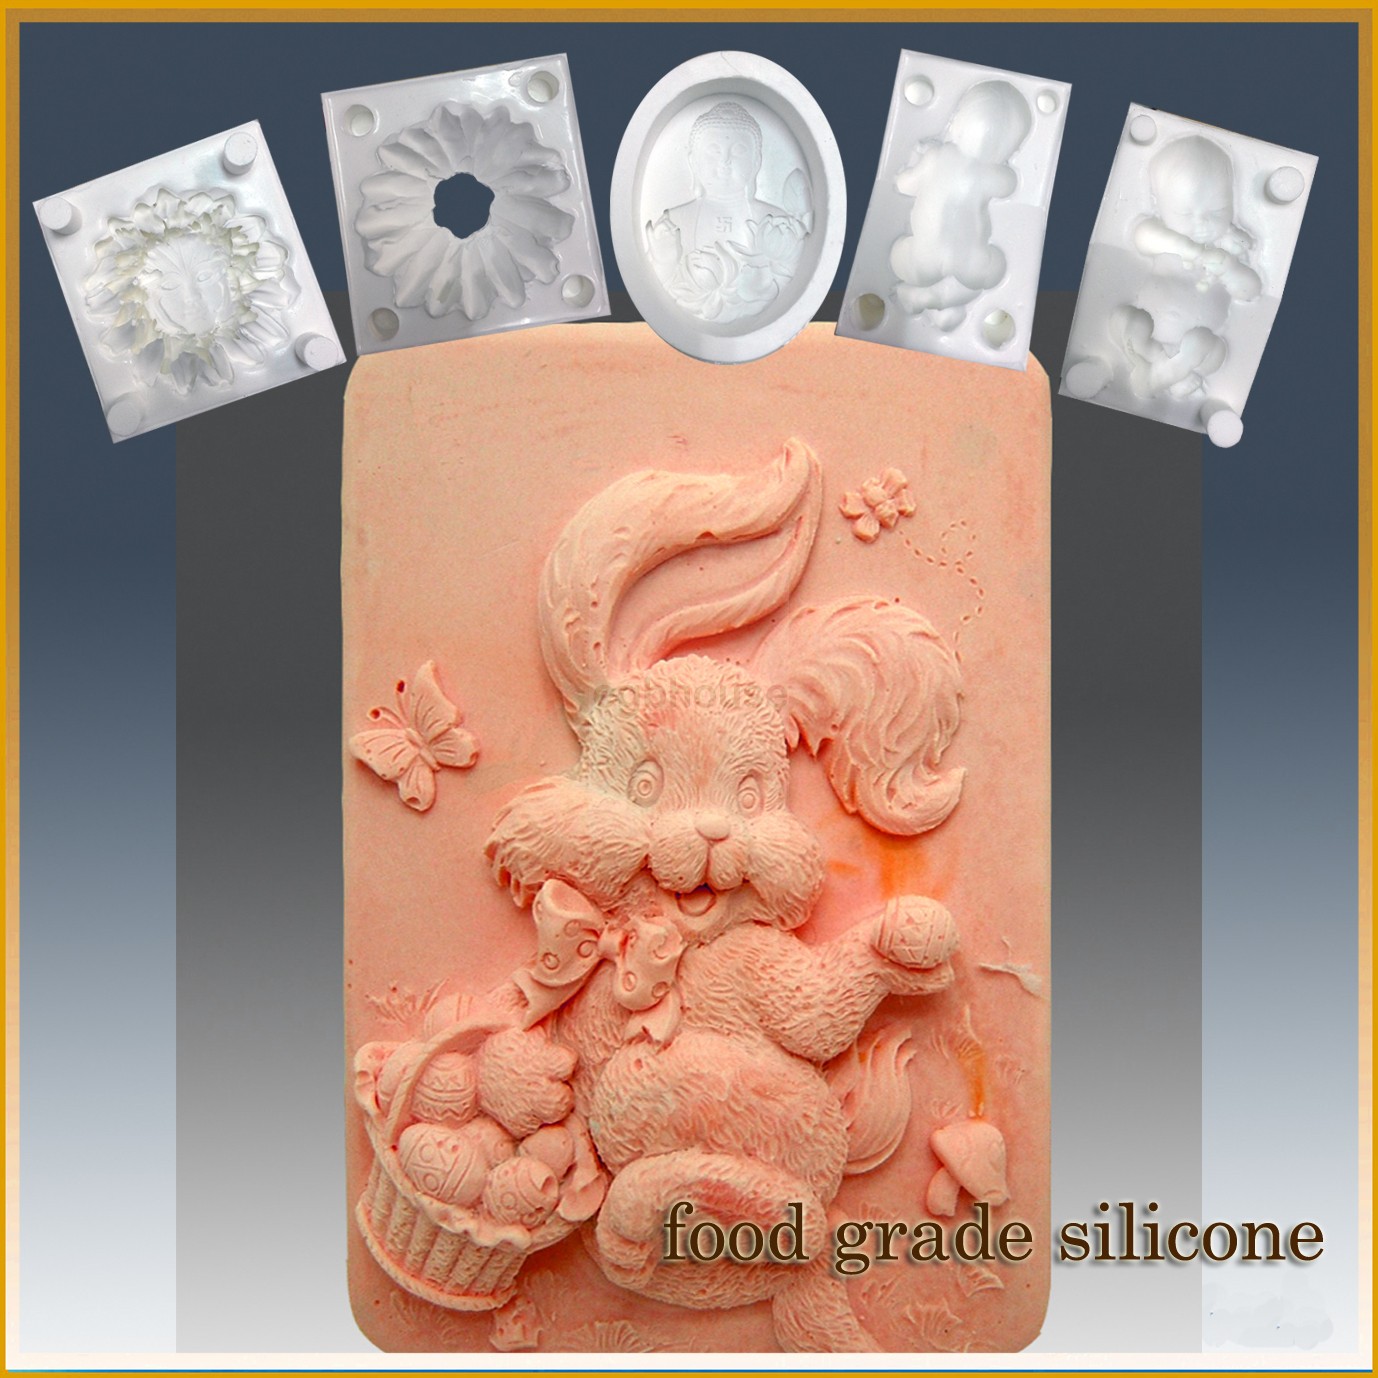  Hoppin' Bunny with basket- Detail of high relief sculpture - Food grade